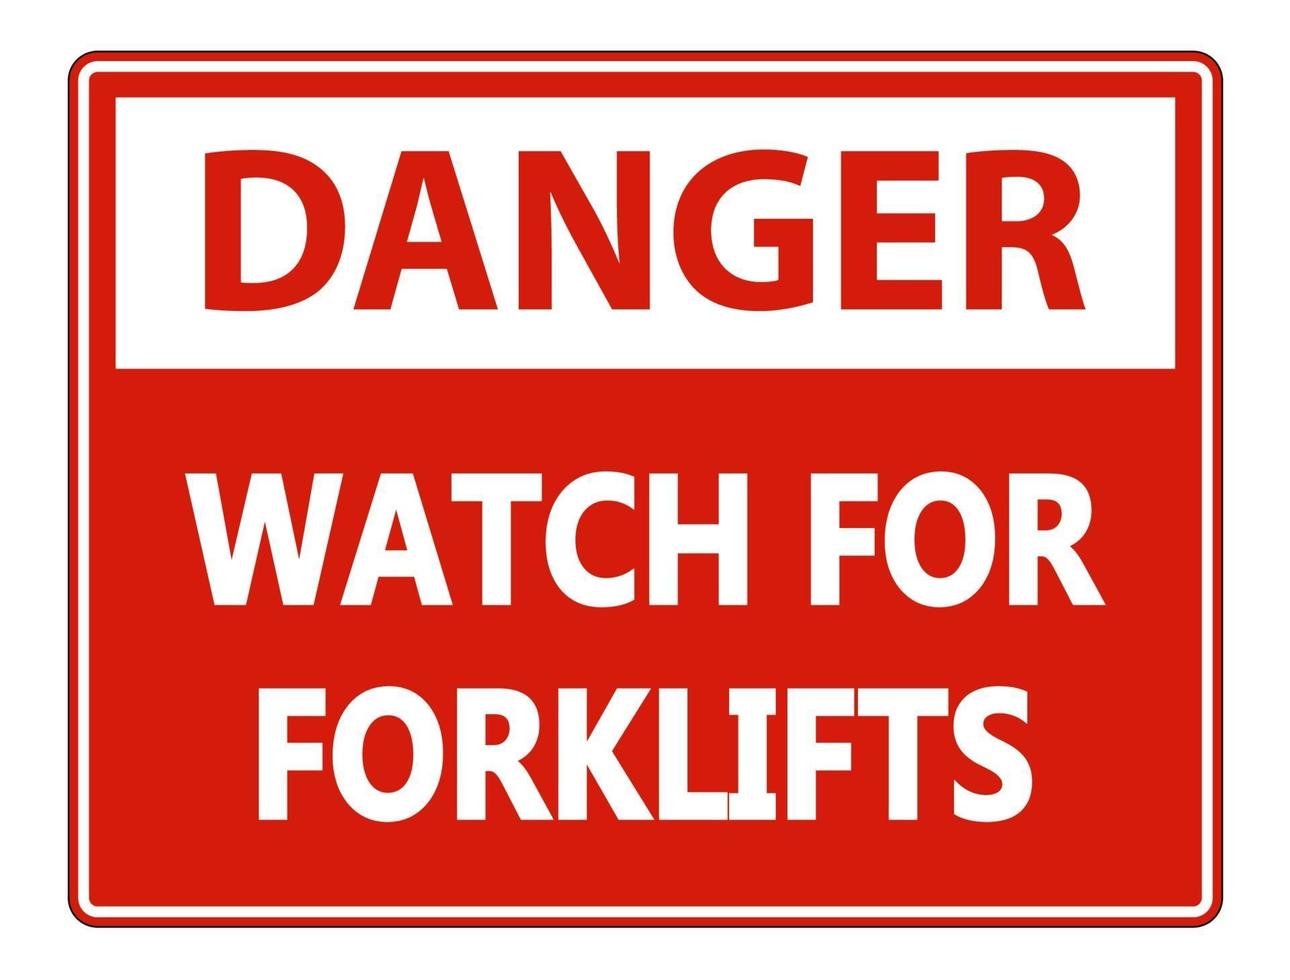 Danger Watch for Forklifts Sign on white background vector